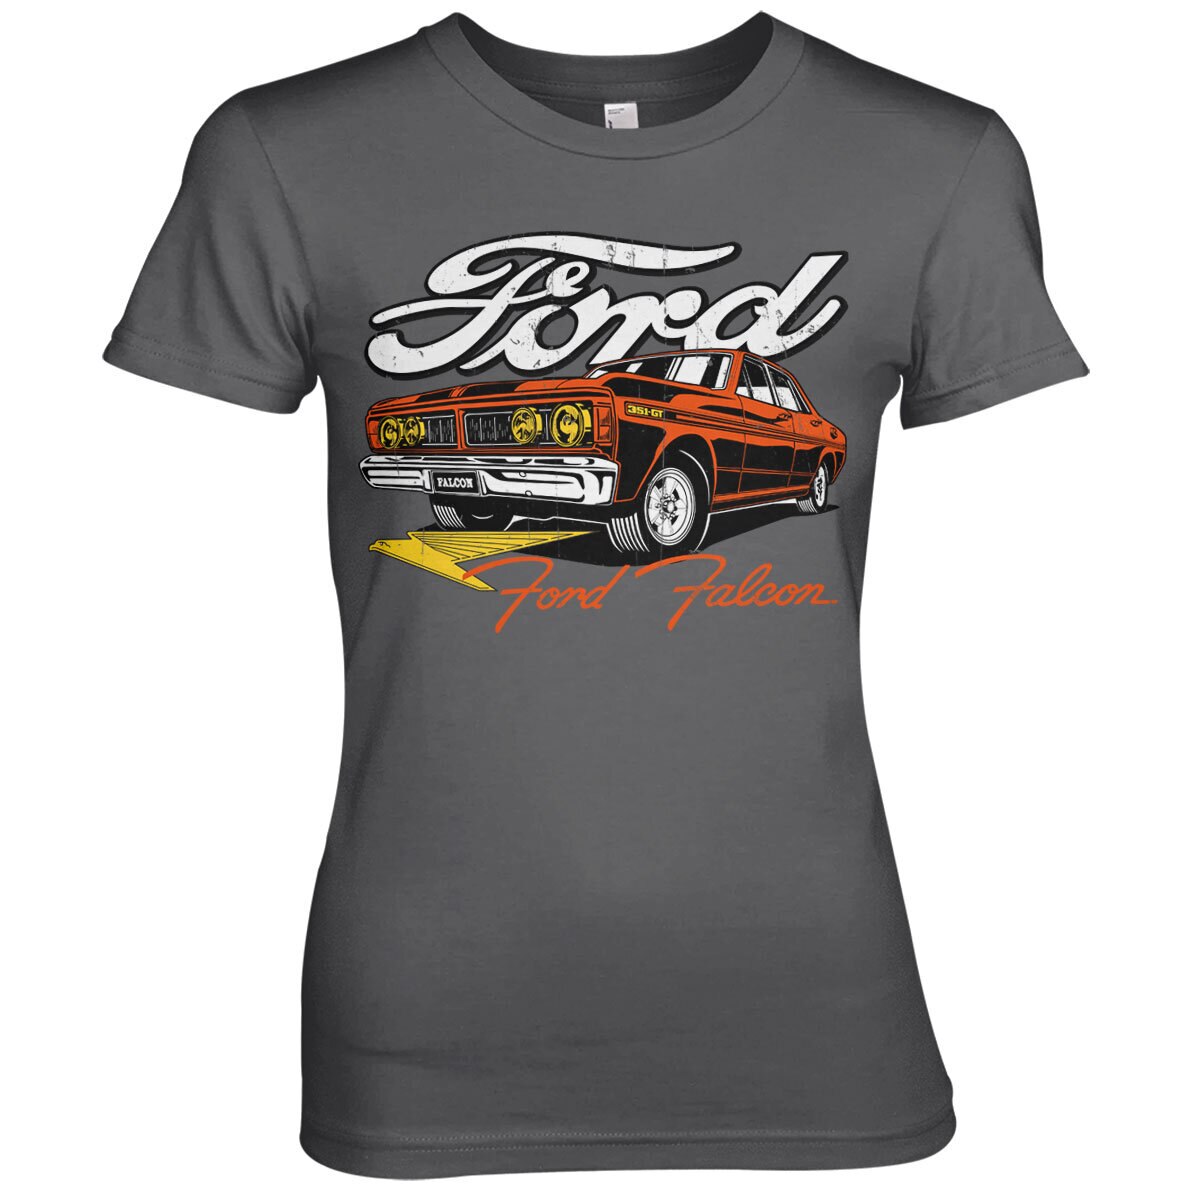 Ford Falcon Girly Tee